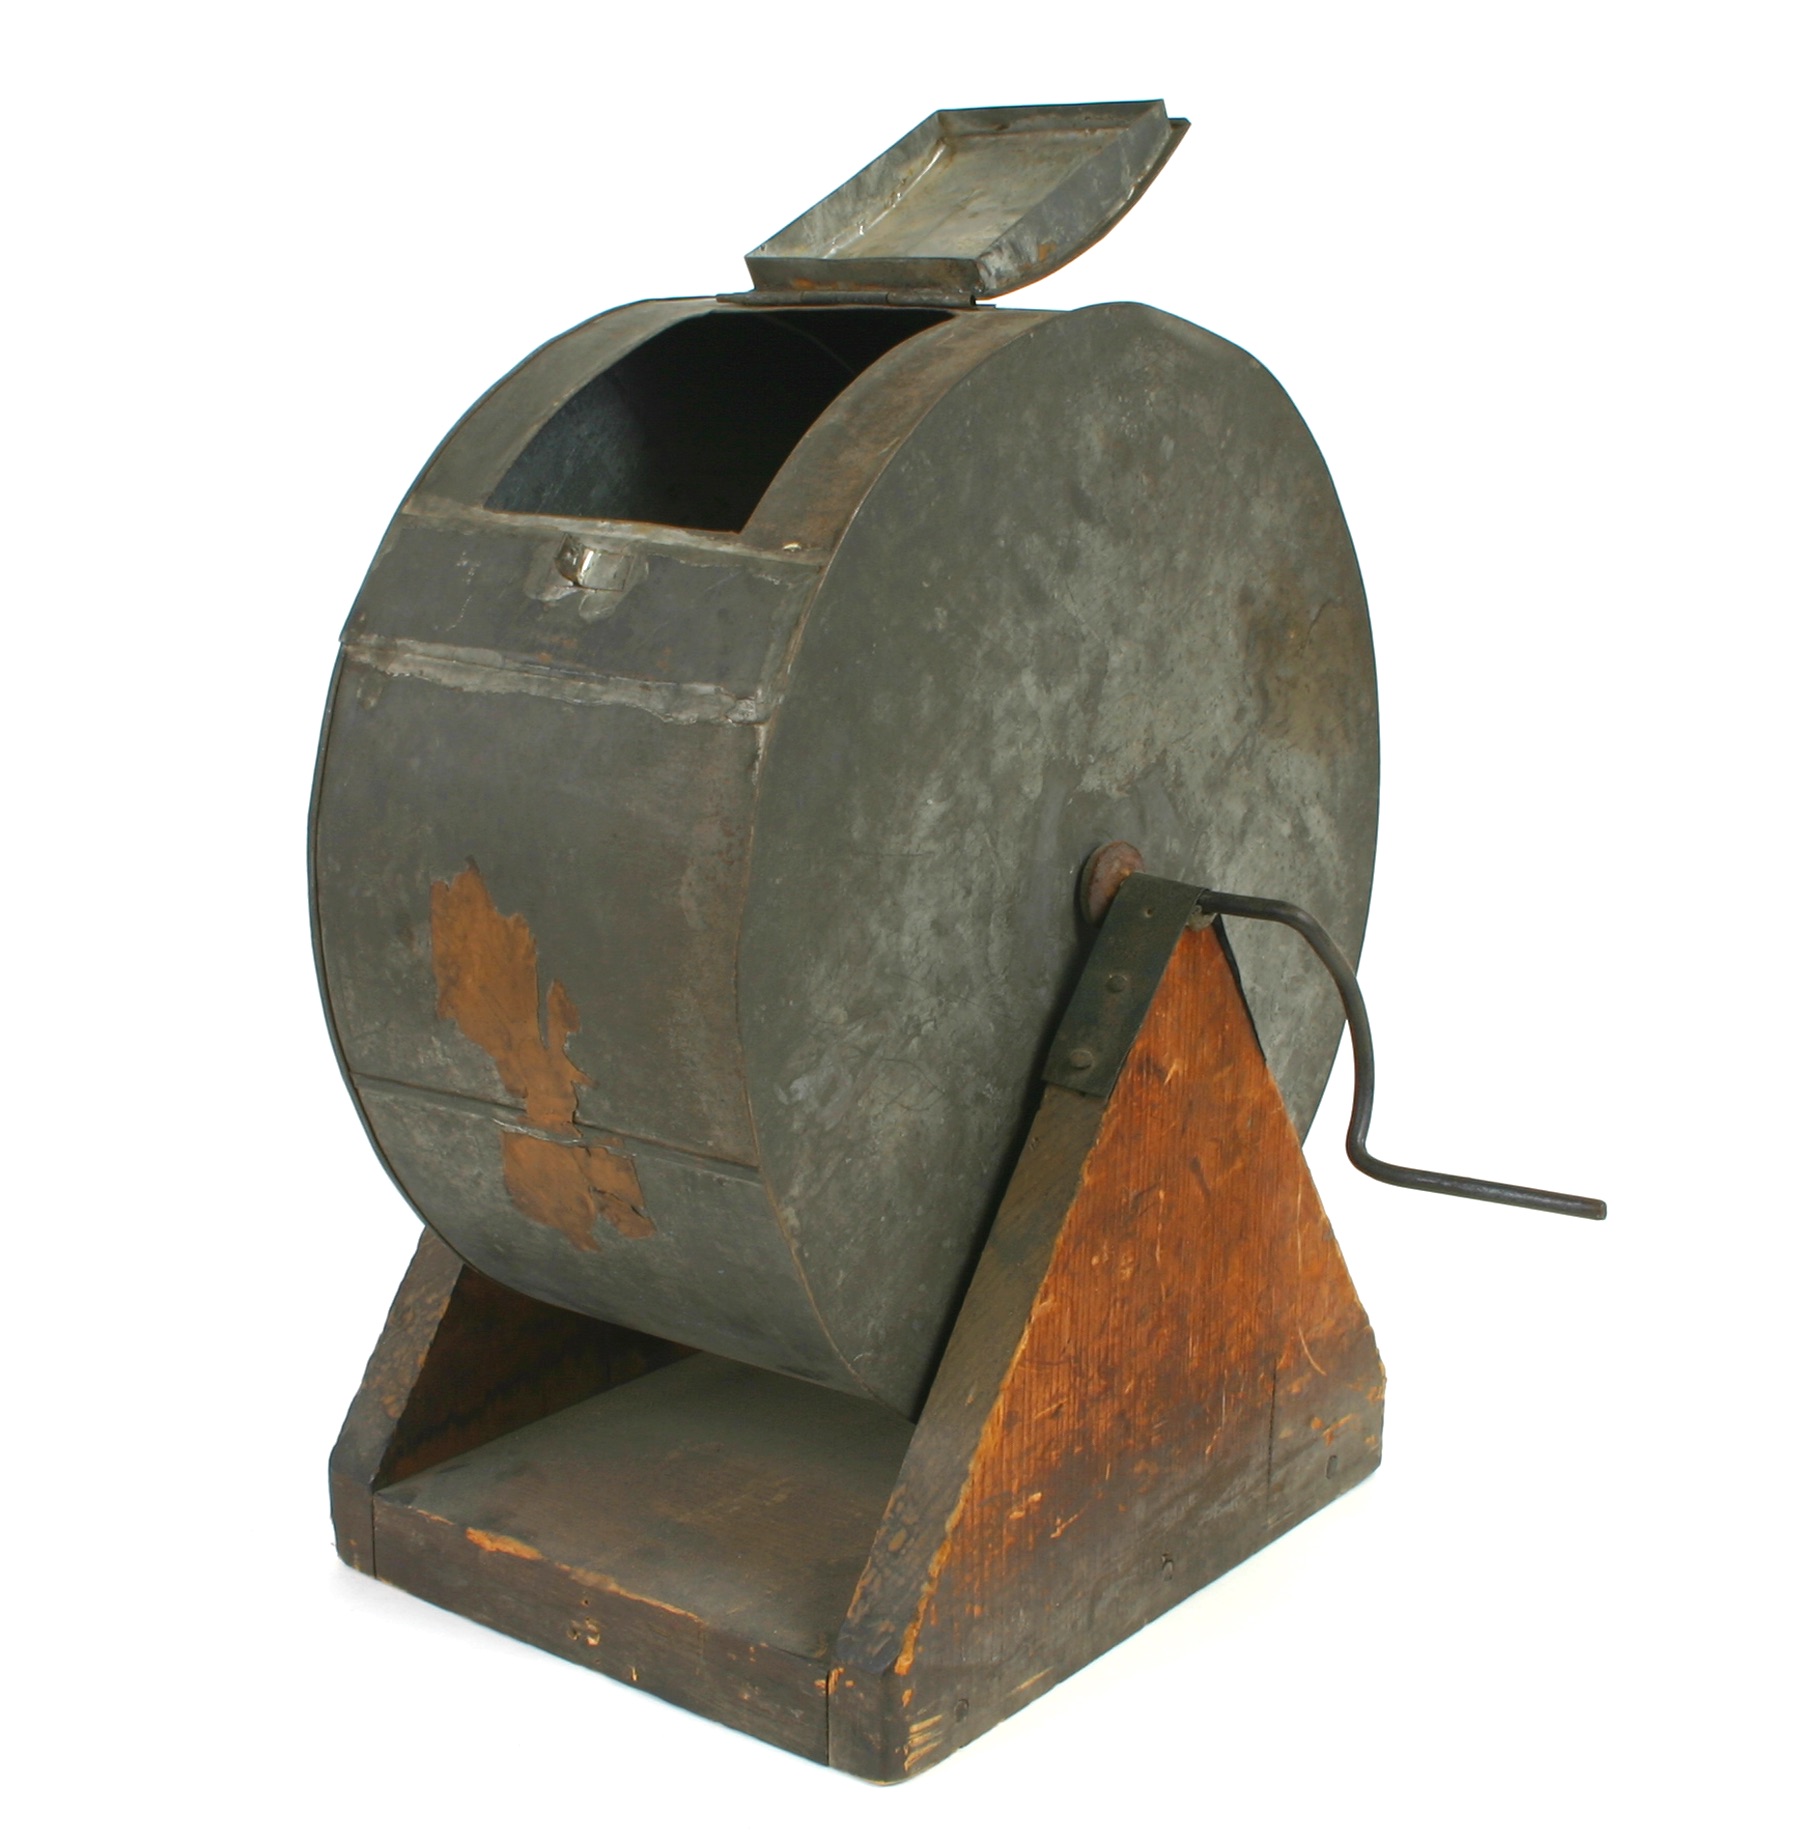 A metal cylinder with a handle for turning and a hatch for selecting items from within, on a stand